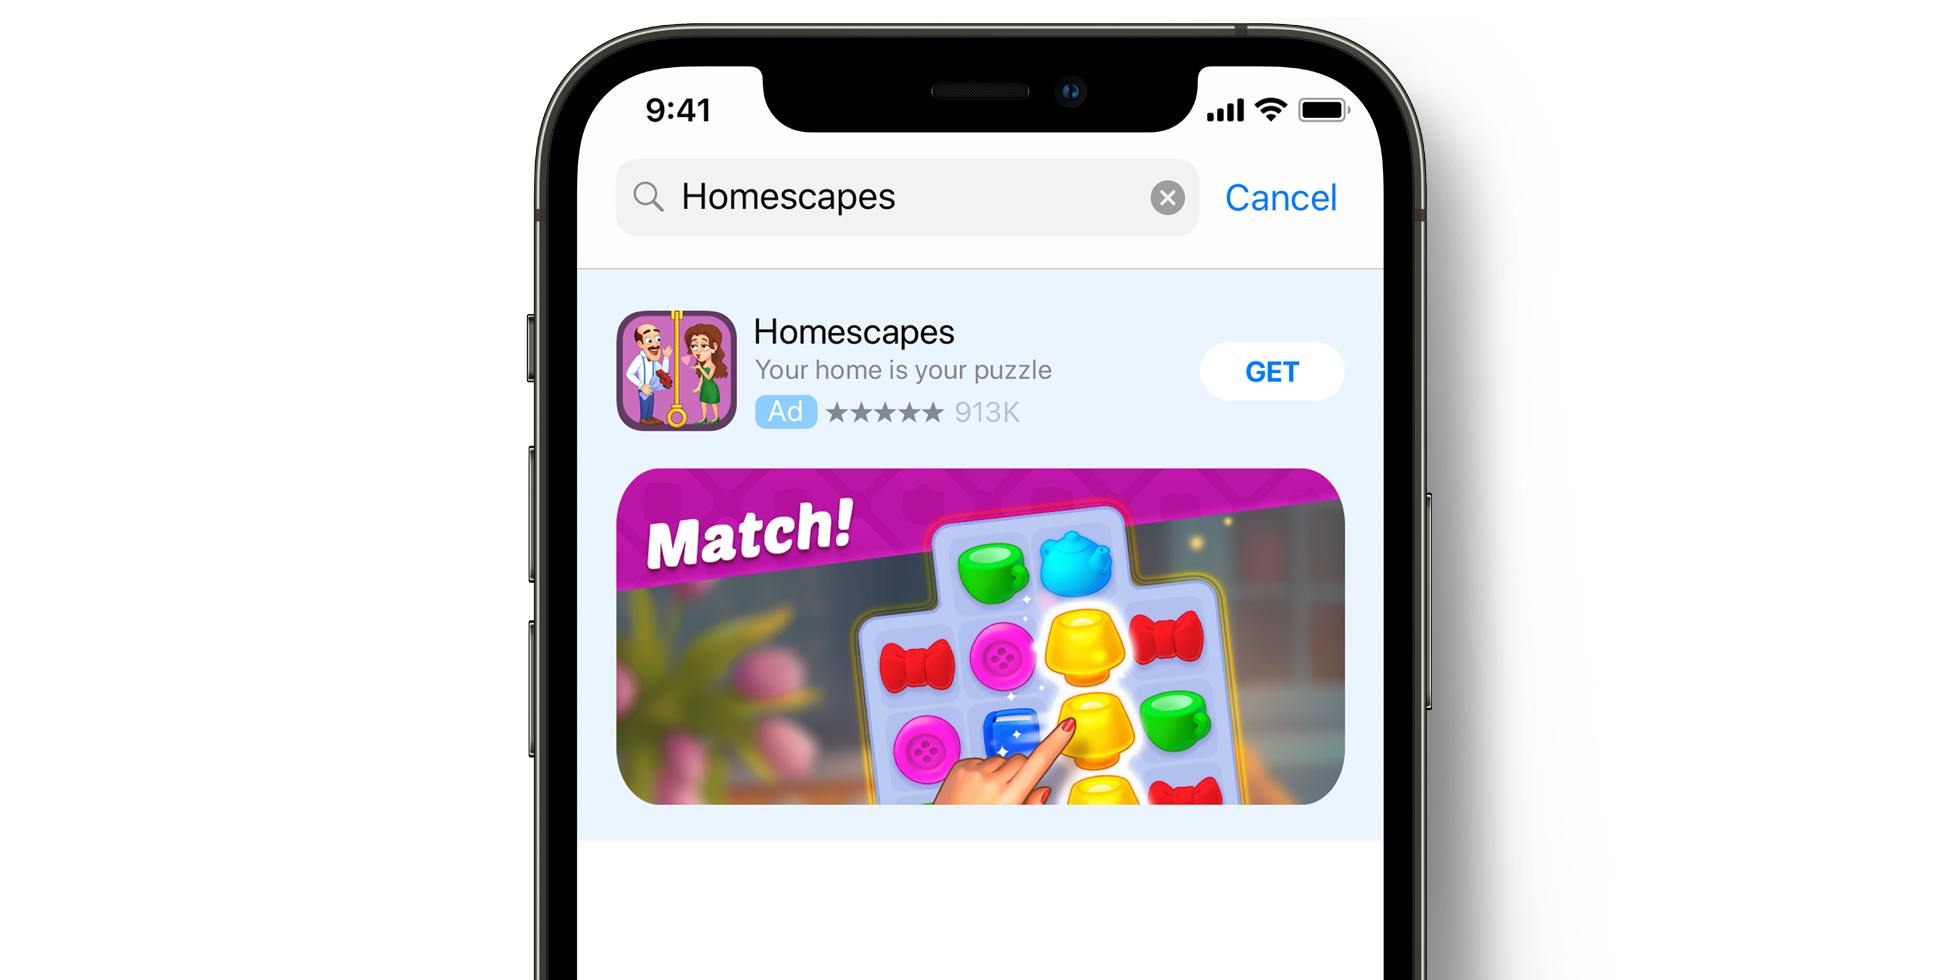 Homescapes Apple Search Ads ad on the App Store 